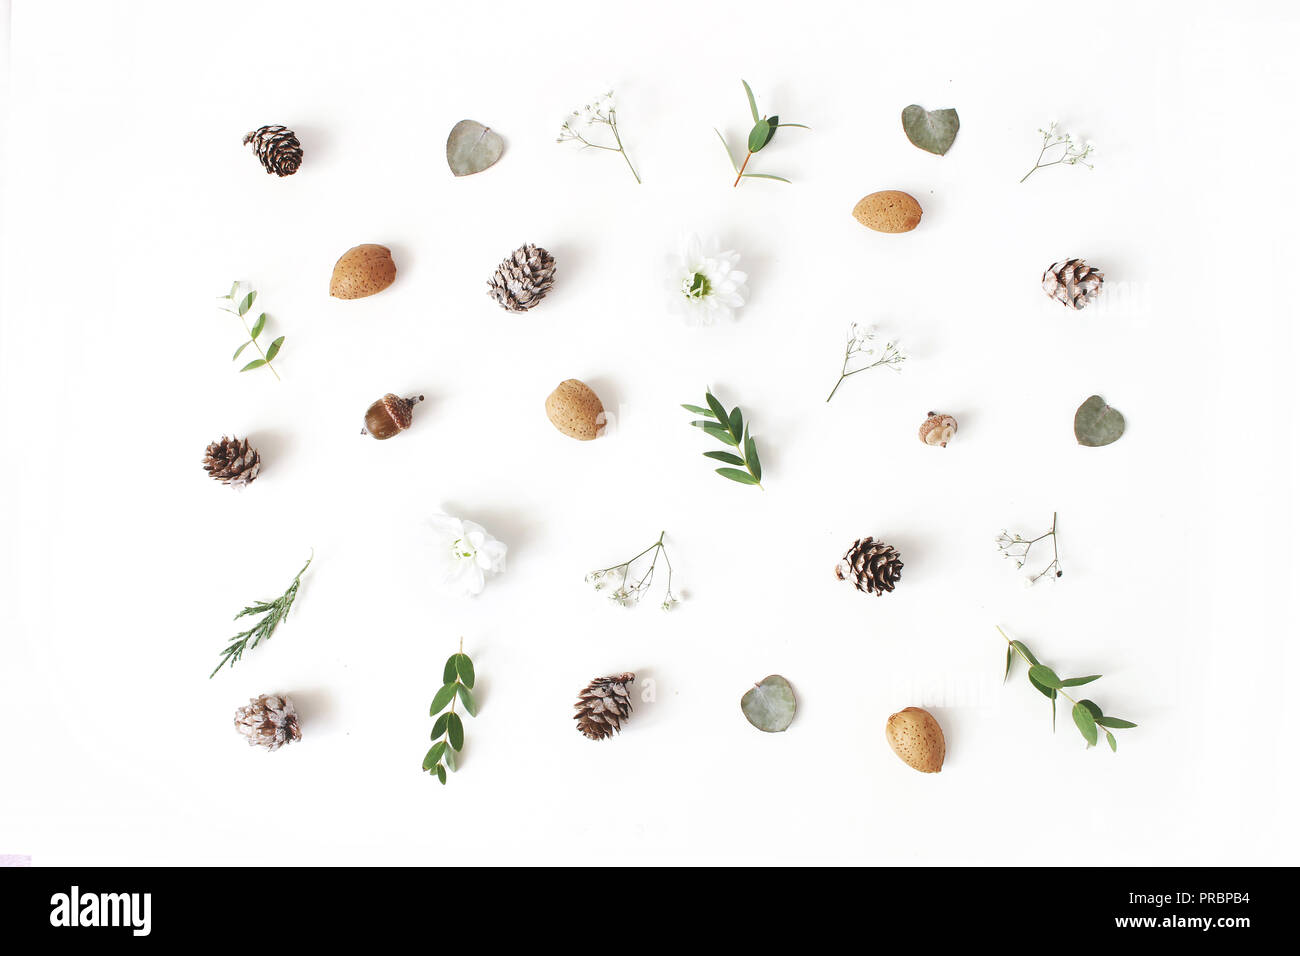 Christmas floral pattern. Winter composition of eucalyptus leaves and branches, larch cones, almonds, chrysanthemum and baby's breath flowers on white table background. Flat lay, top view. Stock Photo